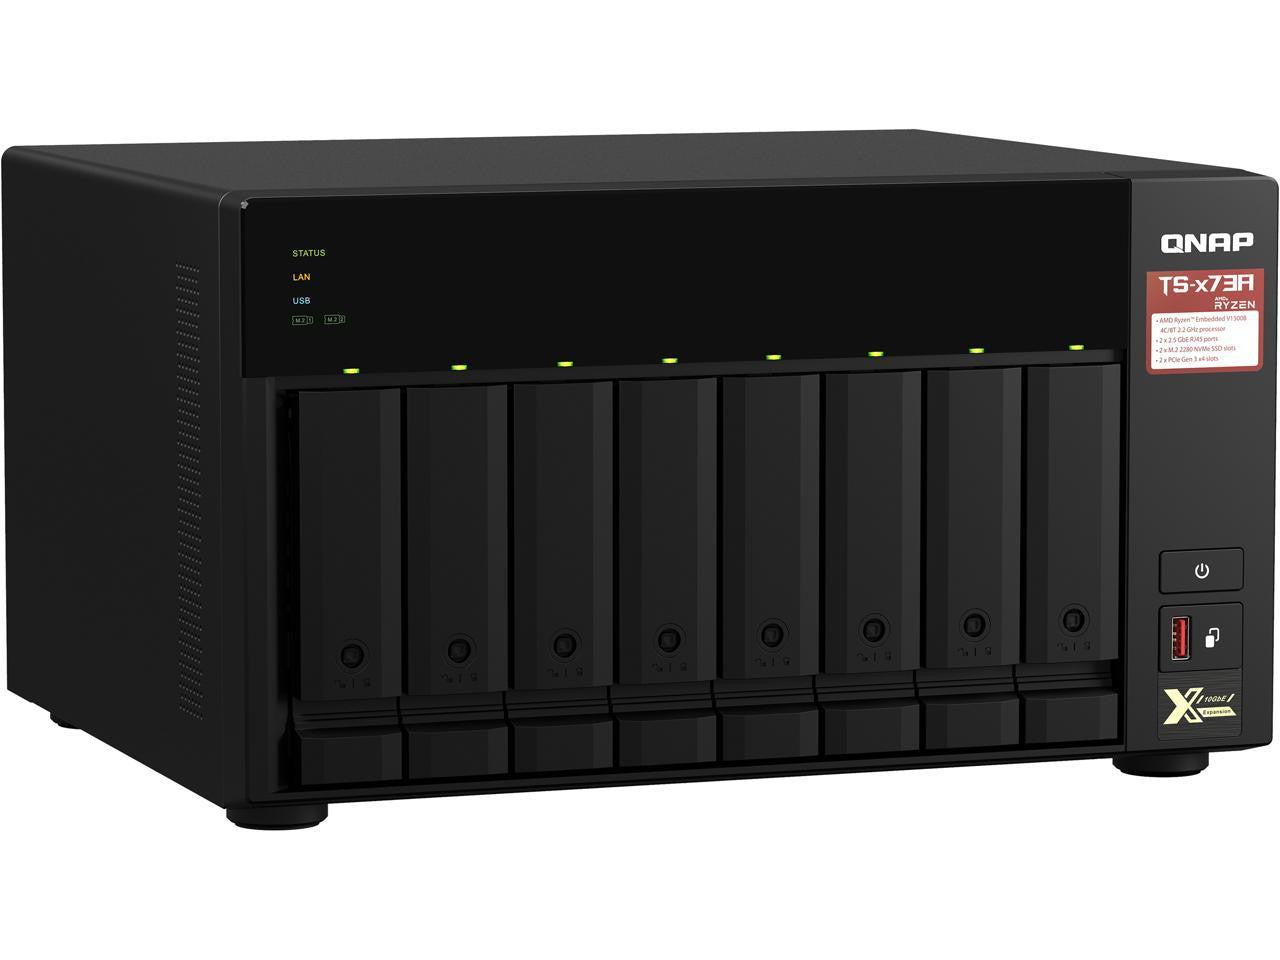 QNAP TS-873A 8-BAY NAS with 64GB DDR4 RAM and 32TB (8x4TB) Western Digital RED PLUS Drives Fully Assembled and Tested